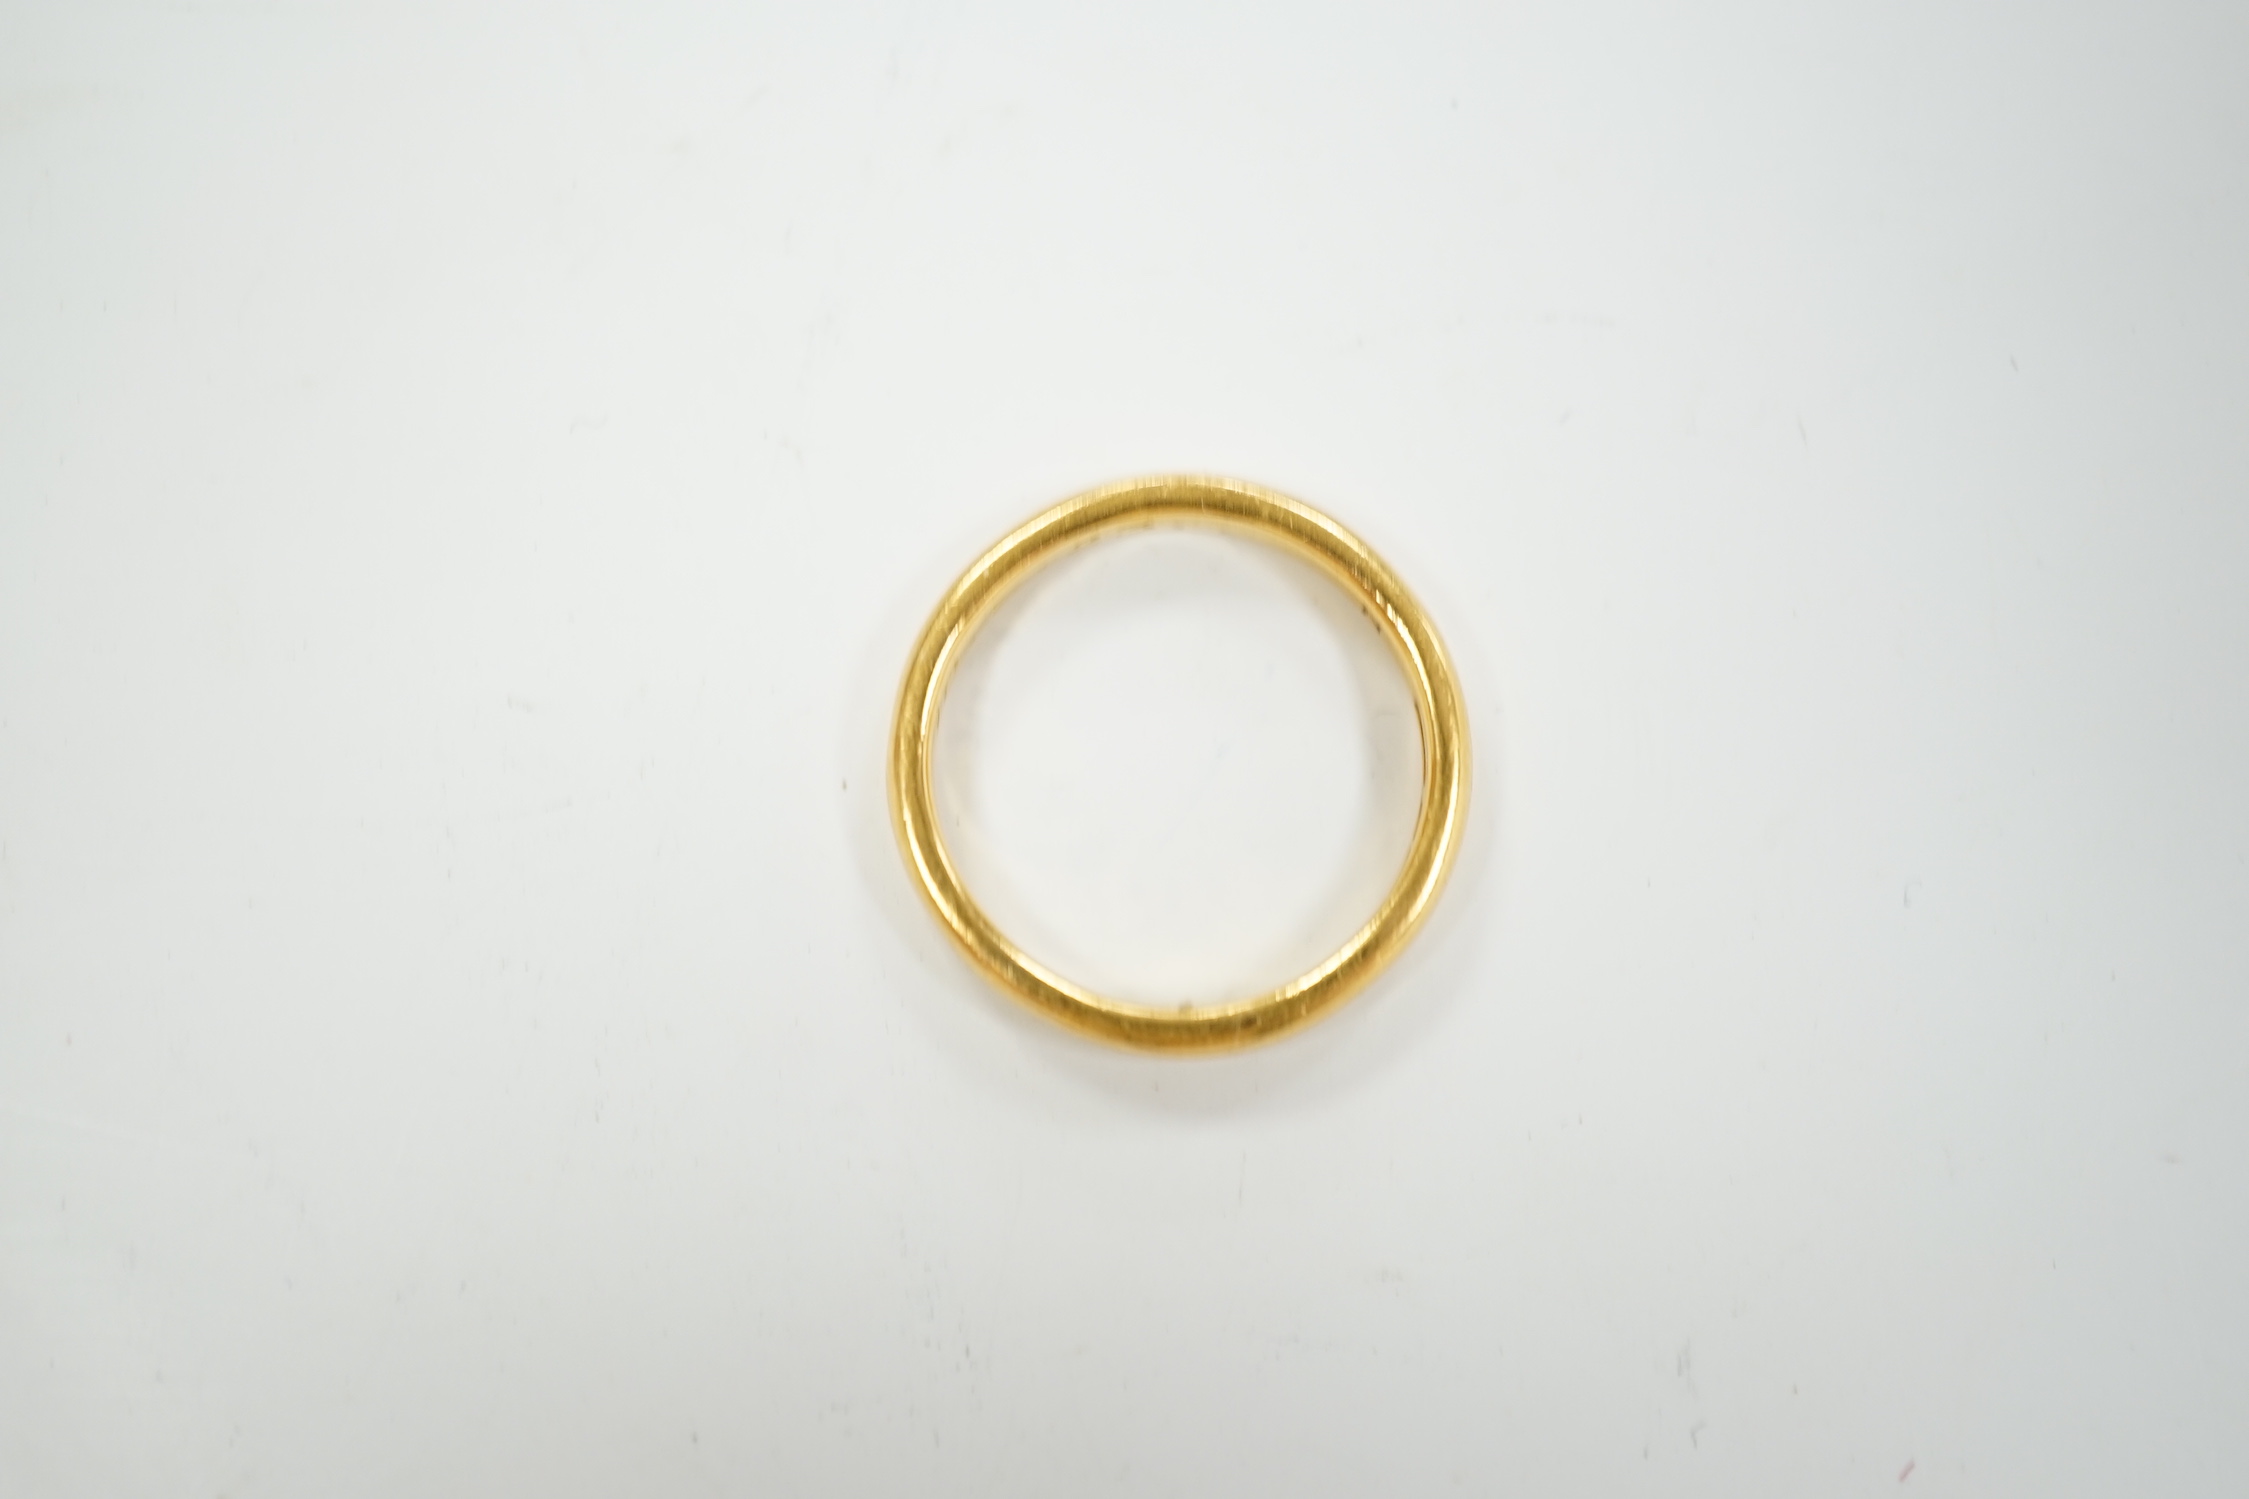 A George V 22ct gold wedding band, size Q, 5.4 grams.